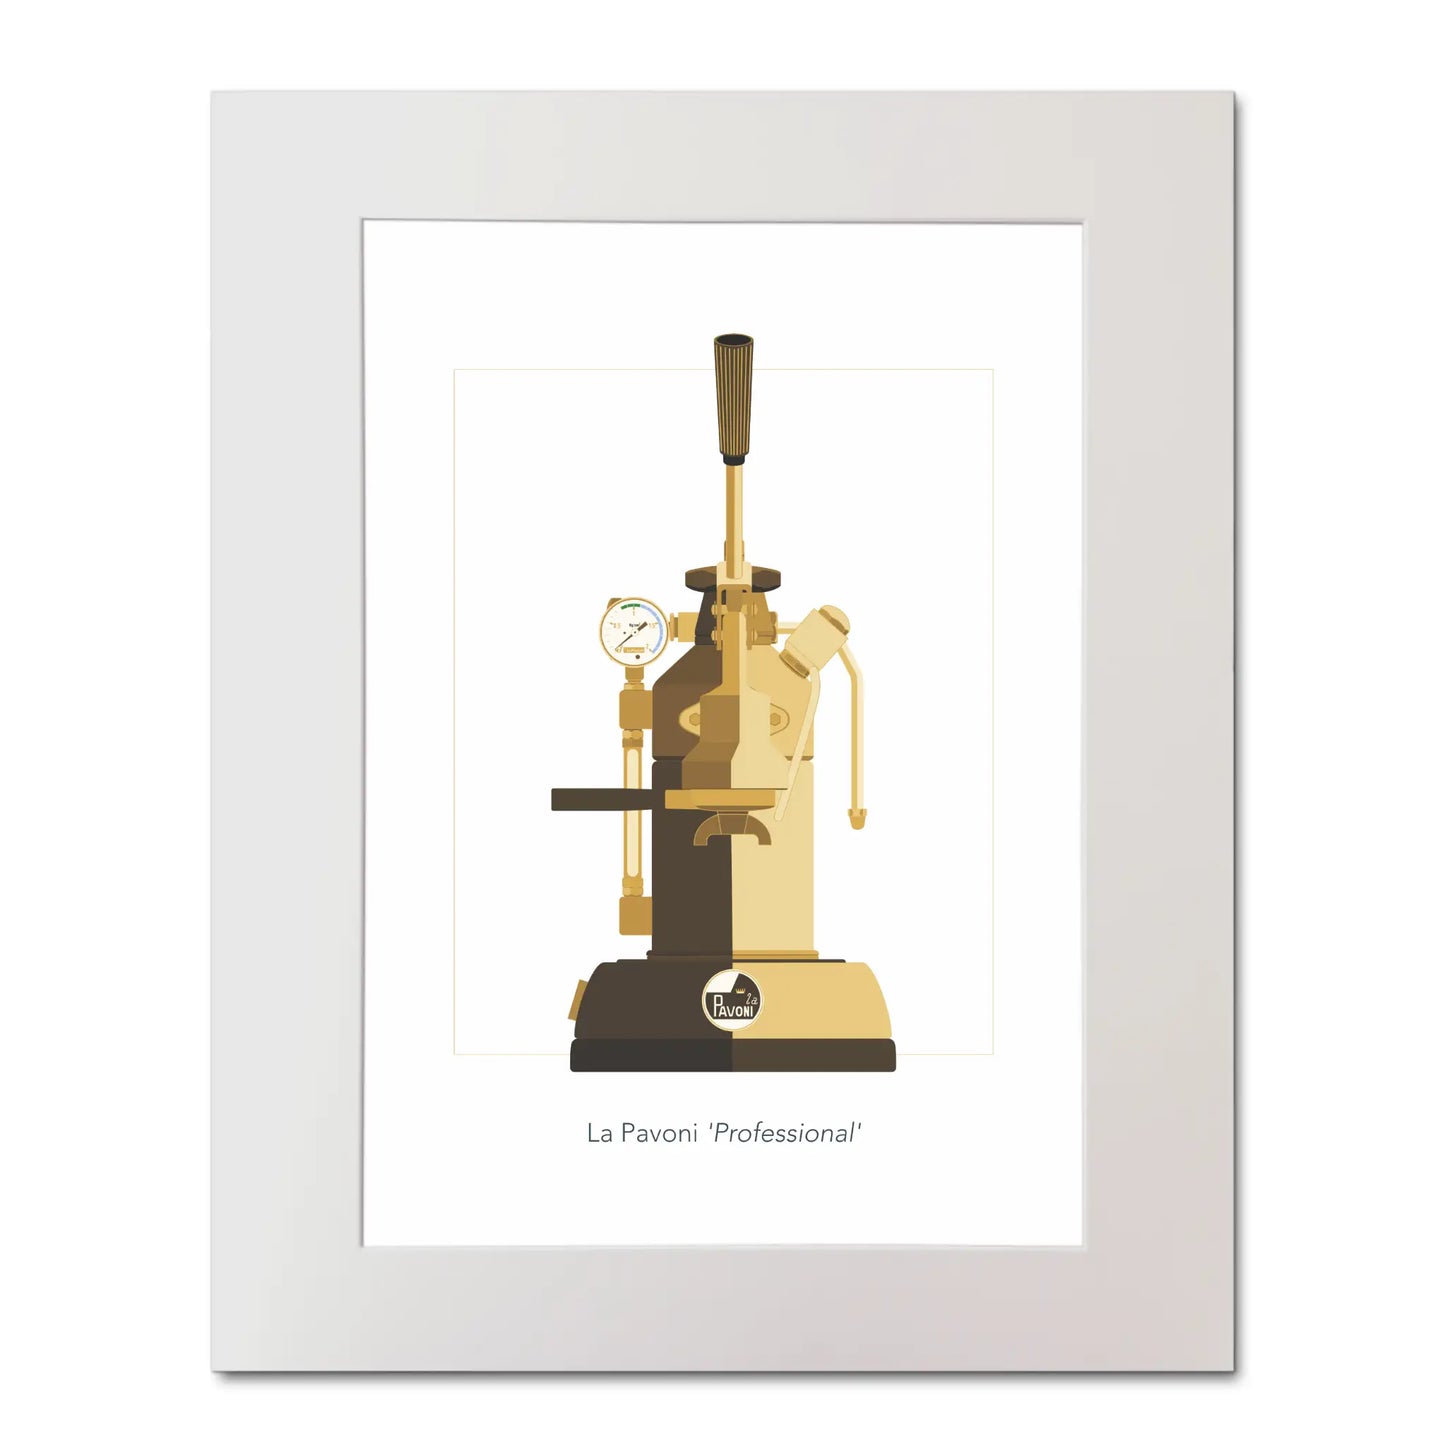 Mounted illustrated wall art of a La Pavoni lever coffee machine, front view in mocha brown.